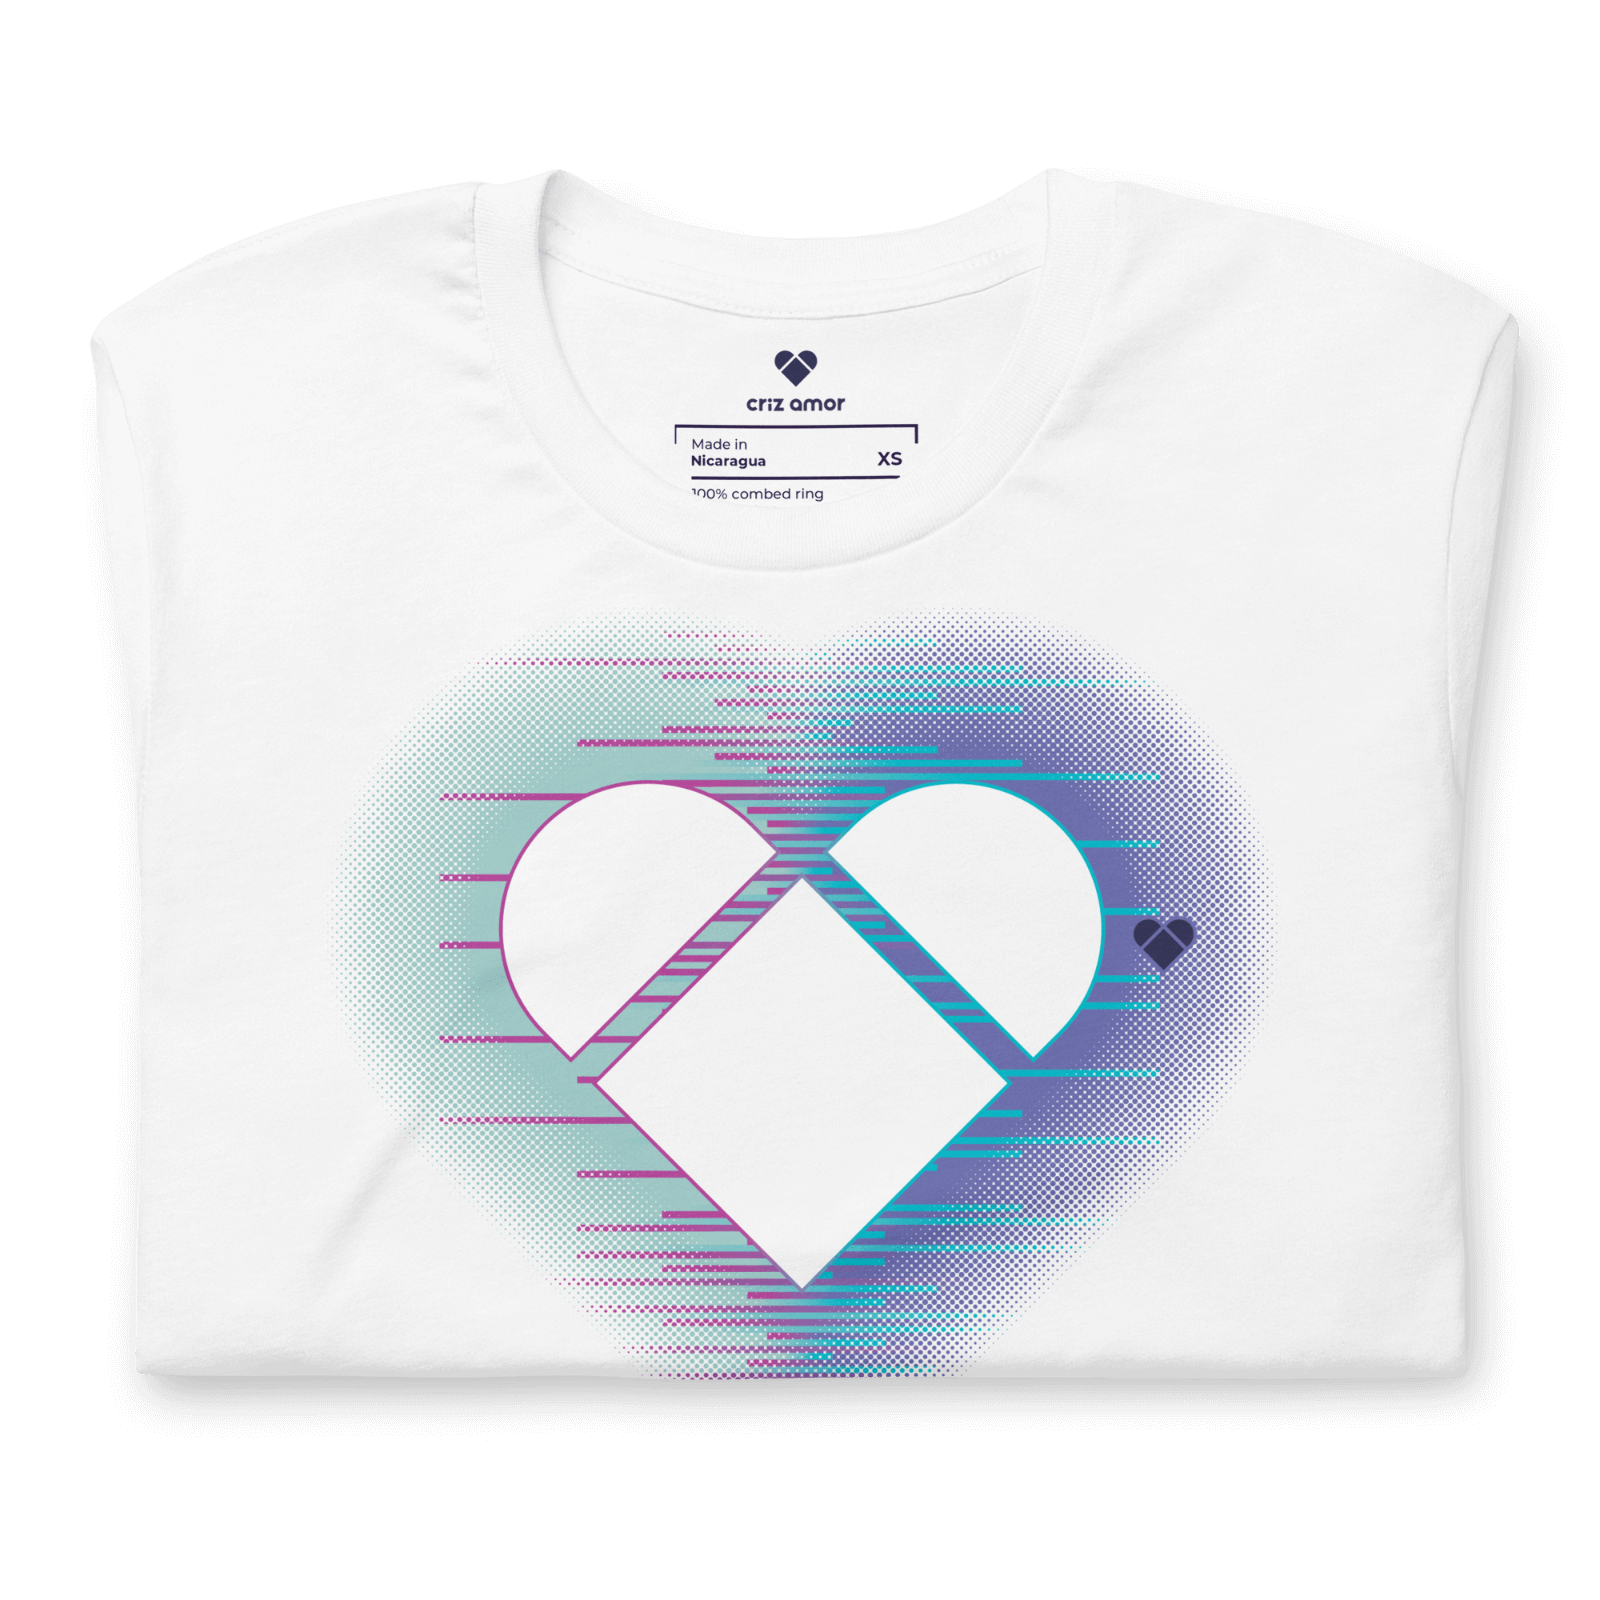 Genderless heart logo tee with vibrant mint and periwinkle aura from Amor Dual by CRiZ AMOR